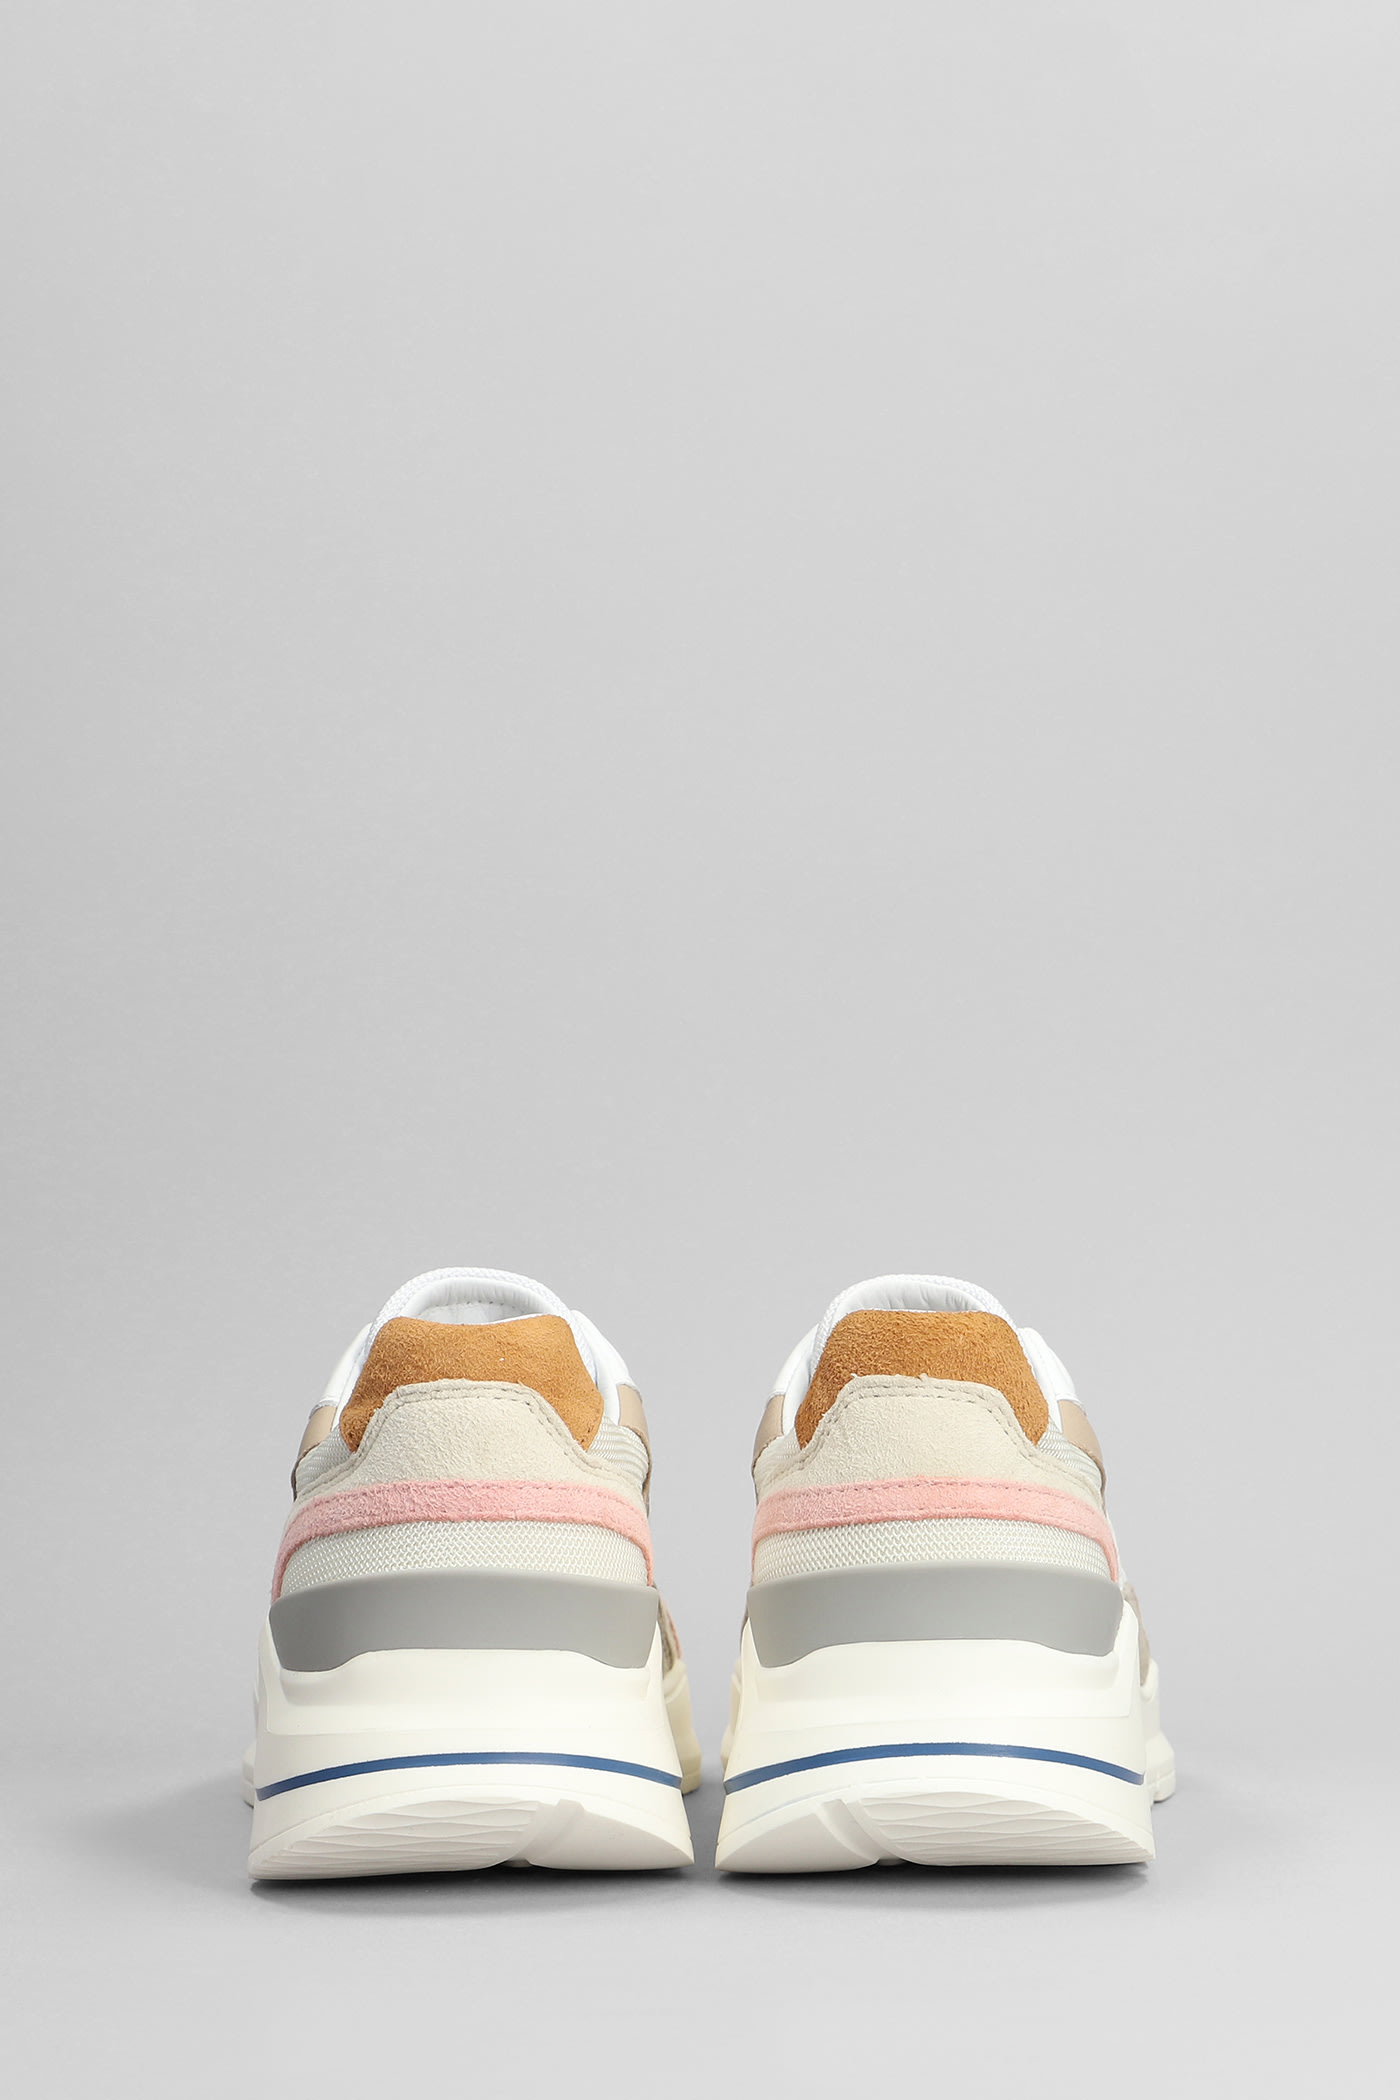 Shop Date Fuga Sneakers In Beige Suede And Fabric